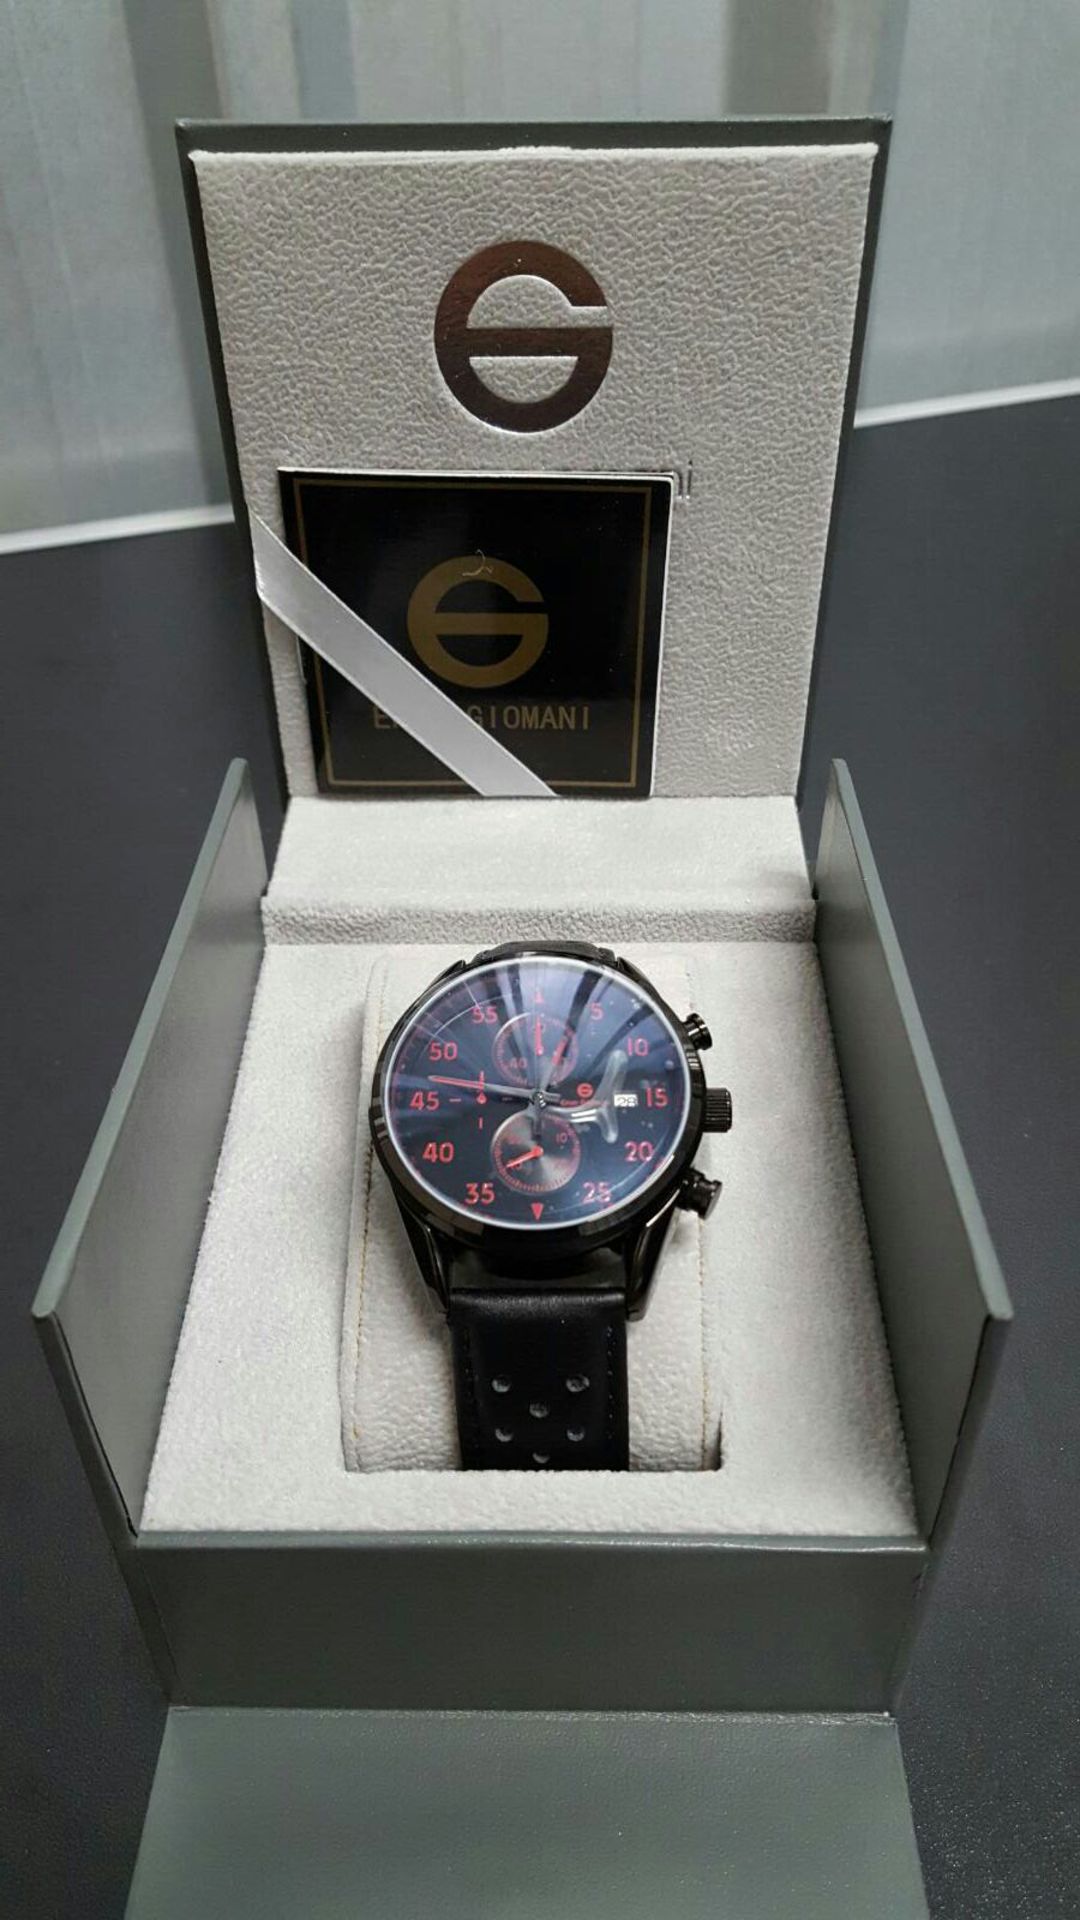 BRAND NEW ENZO GIOMANI EG0027, GENTS BLACK FACE, BLACK LEATHER STRAP CHRONOGRAPH WATCH, COMPLETE - Image 2 of 2